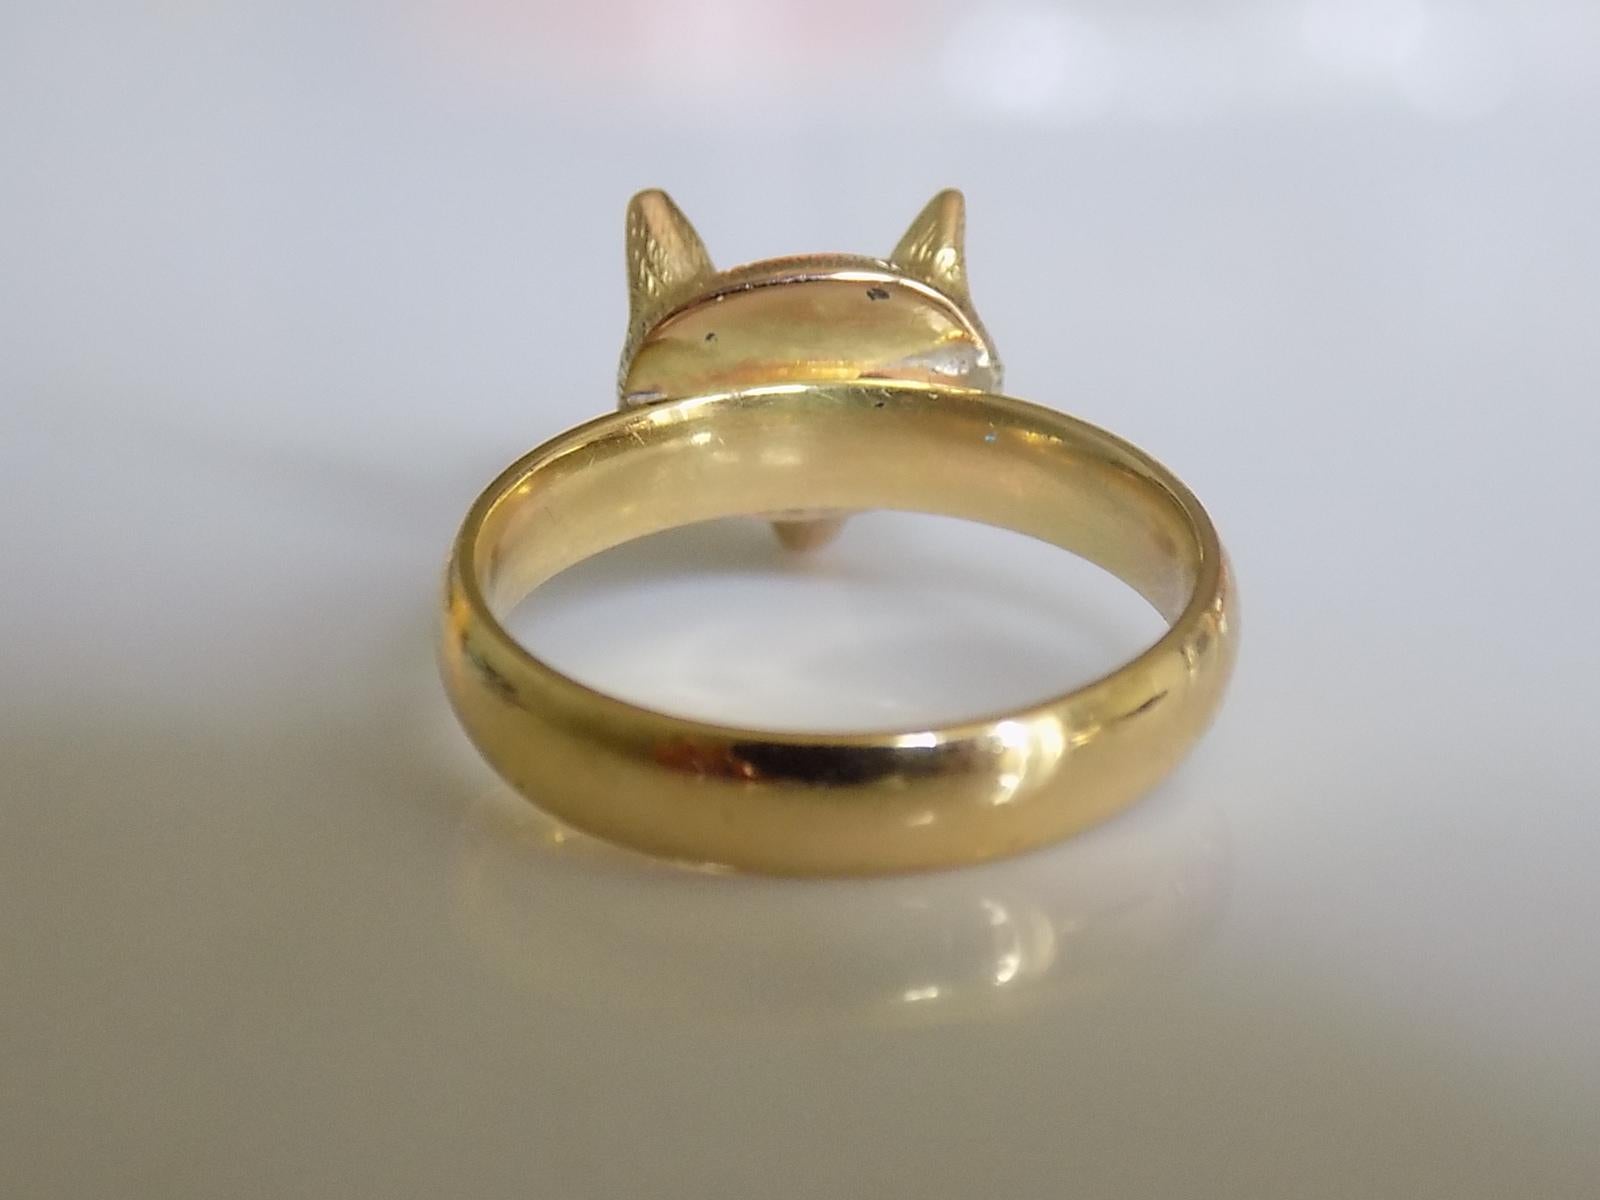 An Extremely Rare, Fine Quality Victorian c.1890 15 Carat Gold Fox Head ring on later 18 Carat Gold shank. The head with one Ruby eye and realistic made another eye. The red eye indicates the accuracy of the shooting hunter that the fox was killed